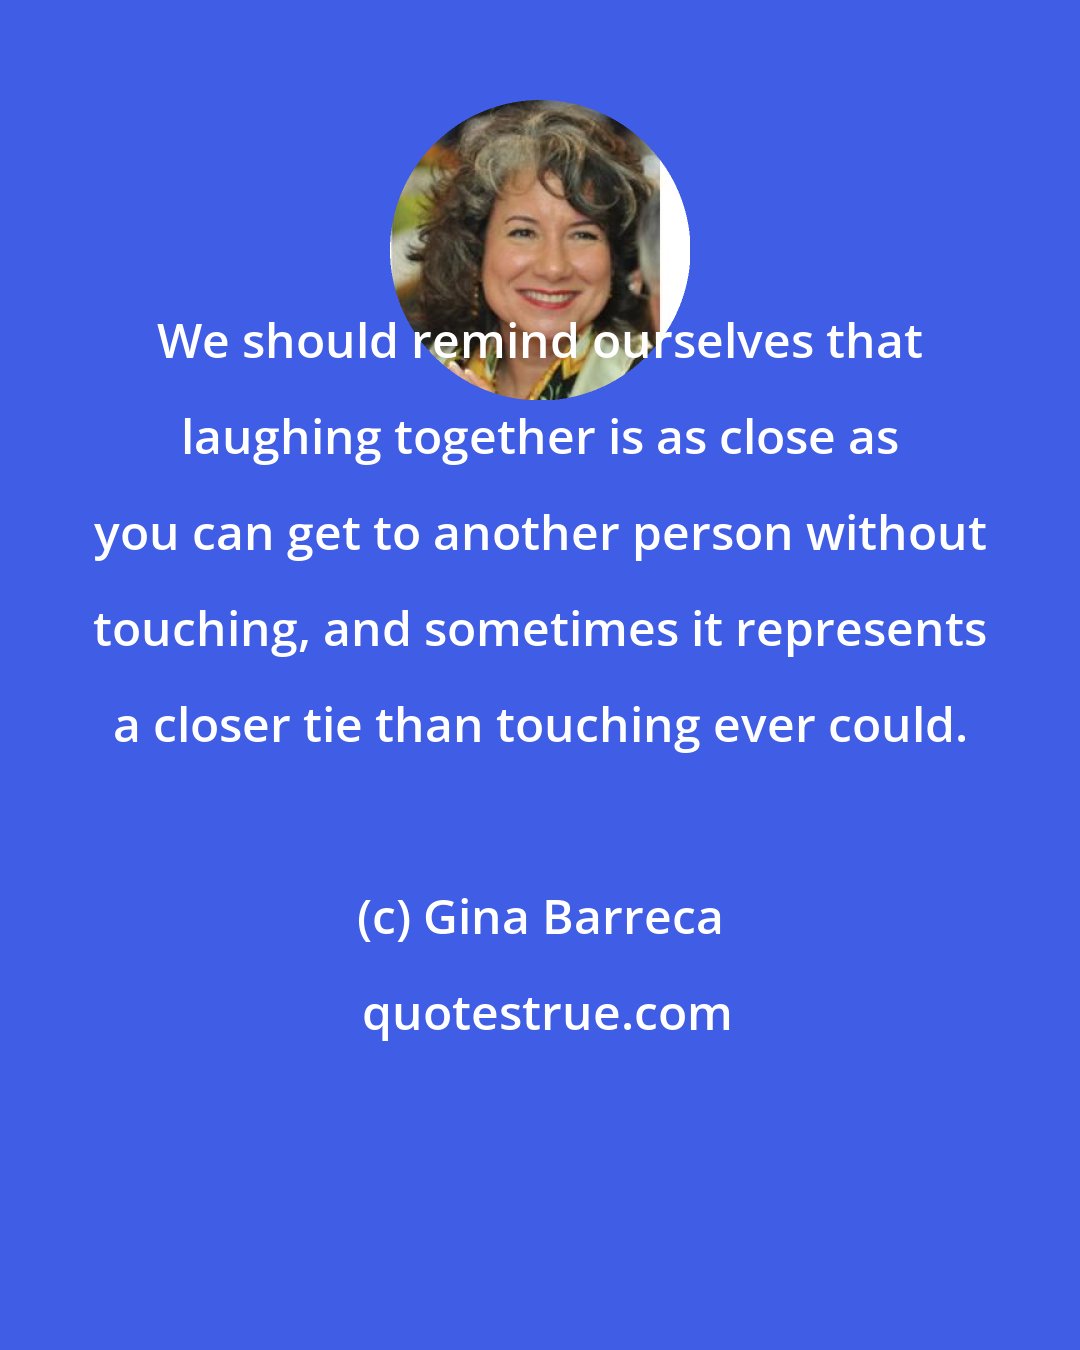 Gina Barreca: We should remind ourselves that laughing together is as close as you can get to another person without touching, and sometimes it represents a closer tie than touching ever could.